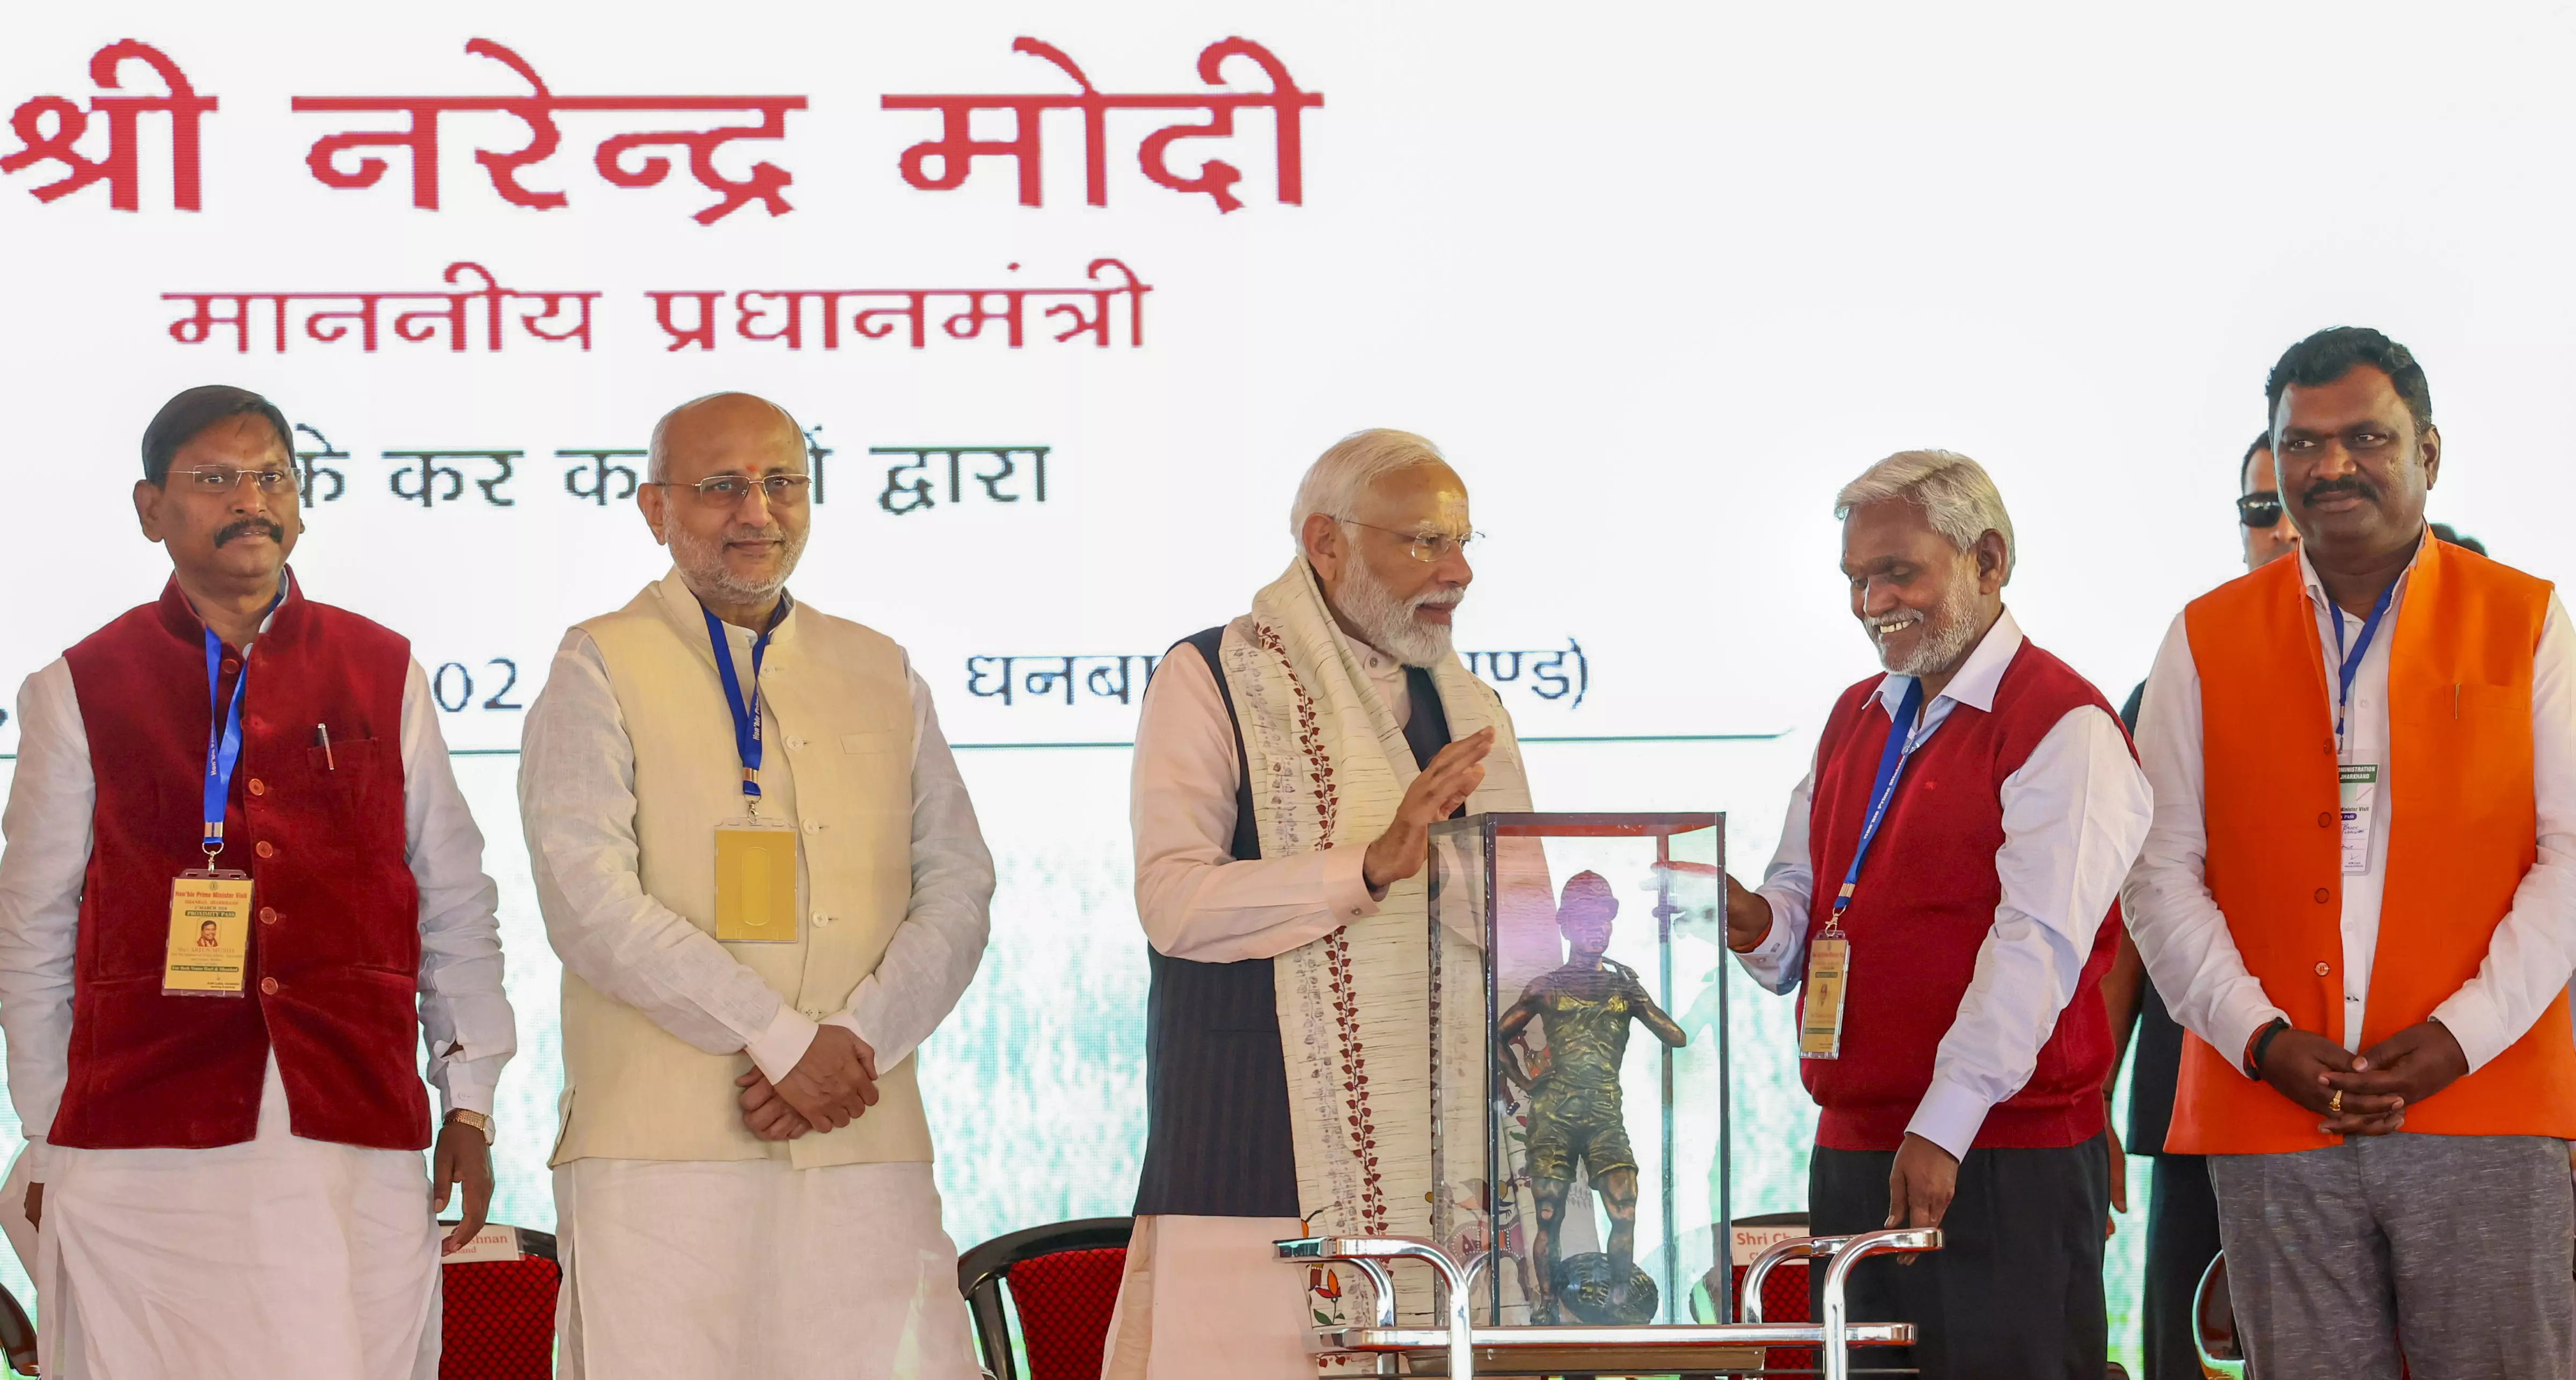 PM Modi launches projects worth Rs 35,700 cr in Jharkhand